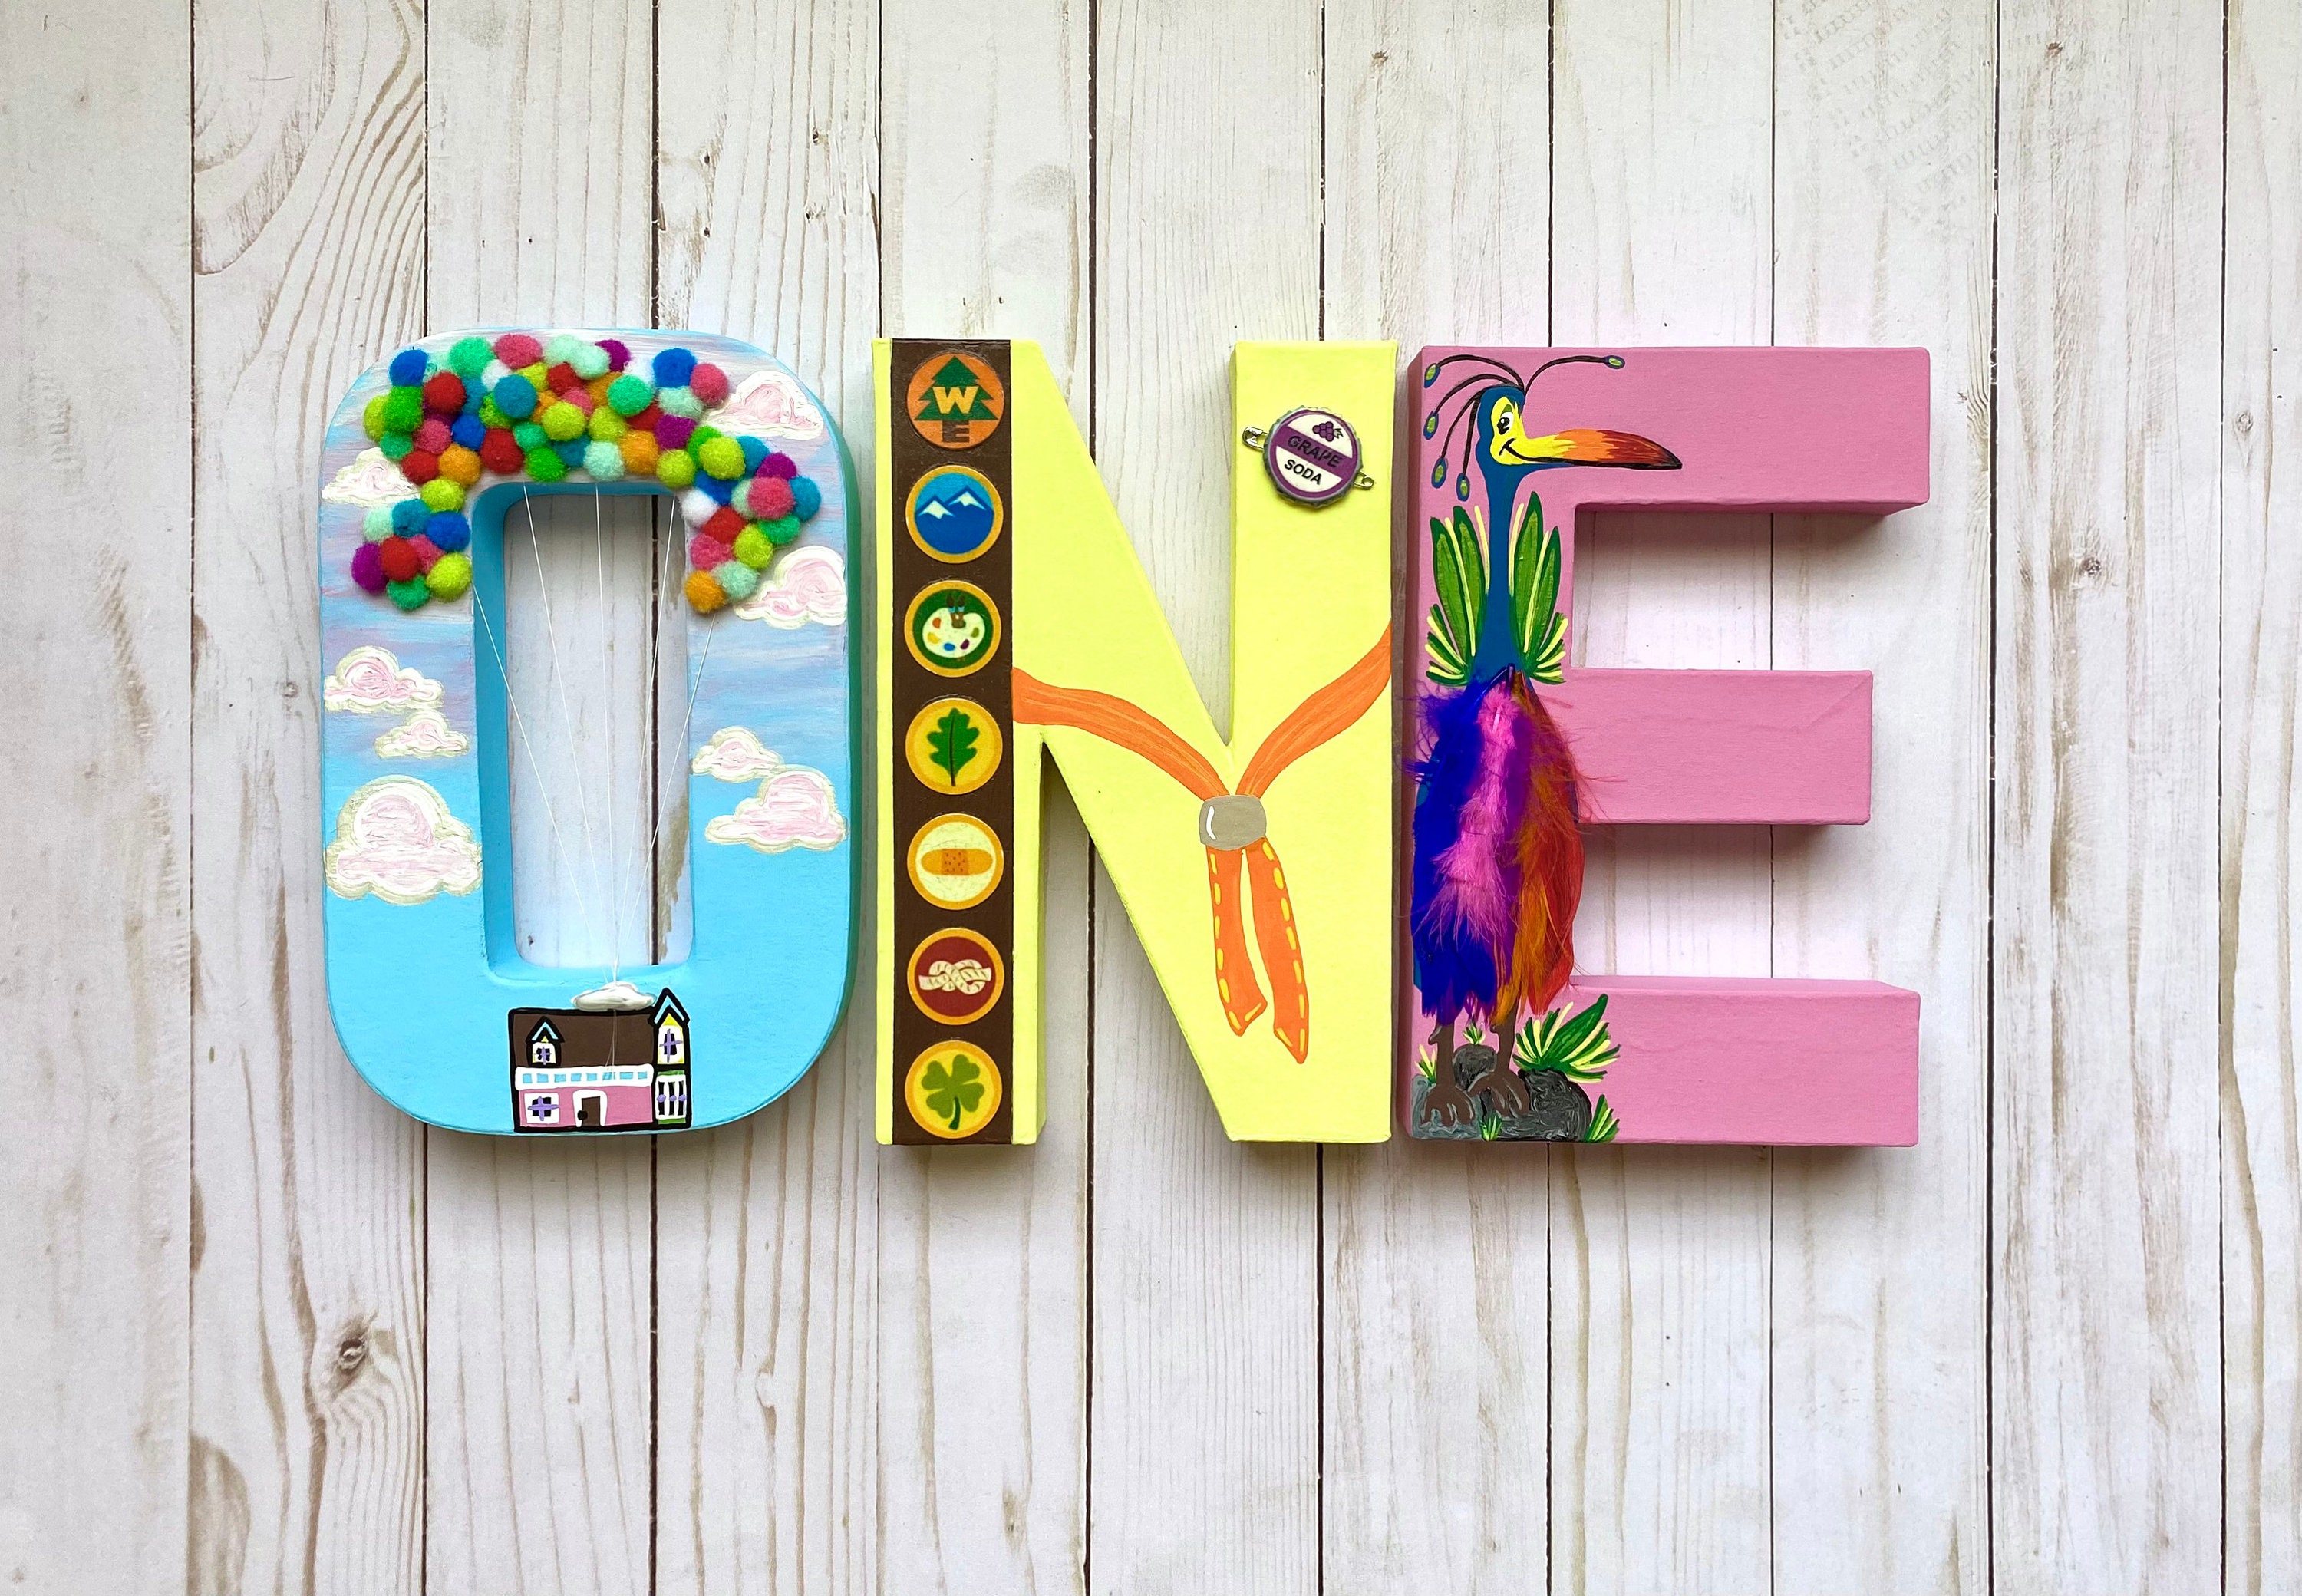 UP Movie Letters, up Pixar, up Birthday Party Decorations,up Movie